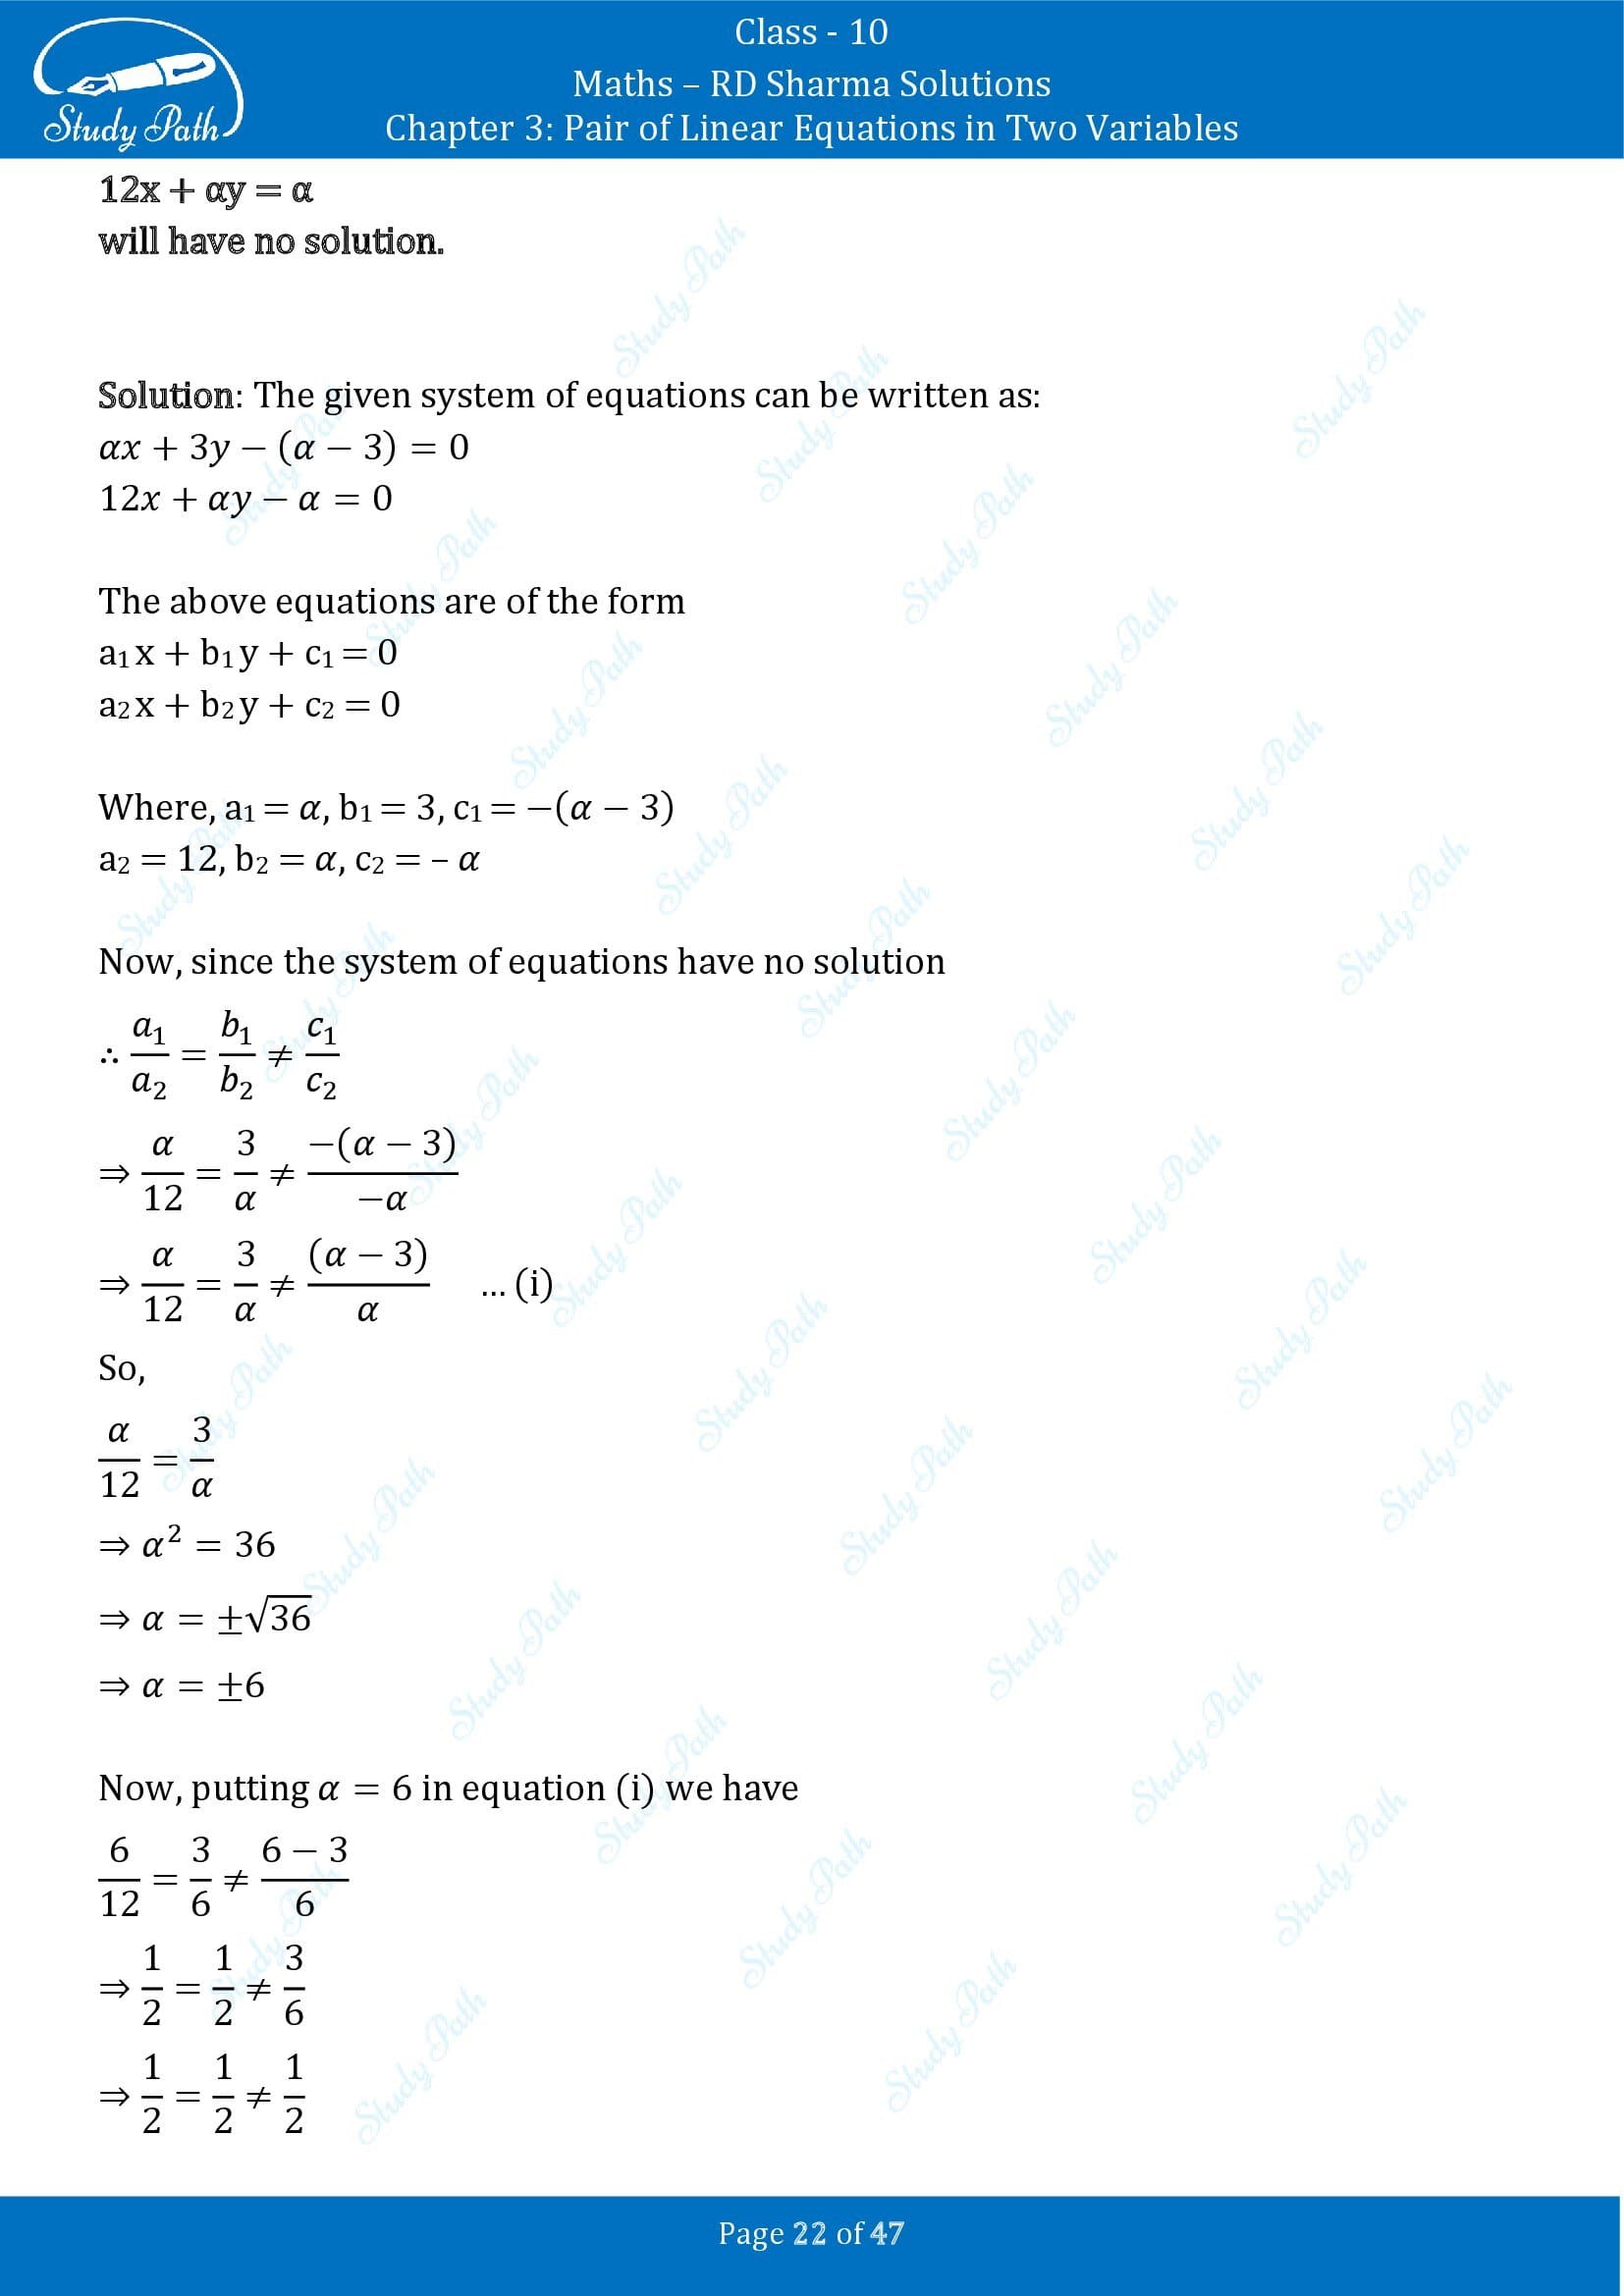 RD Sharma Solutions Class 10 Chapter 3 Pair of Linear Equations in Two Variables Exercise 3.5 00022